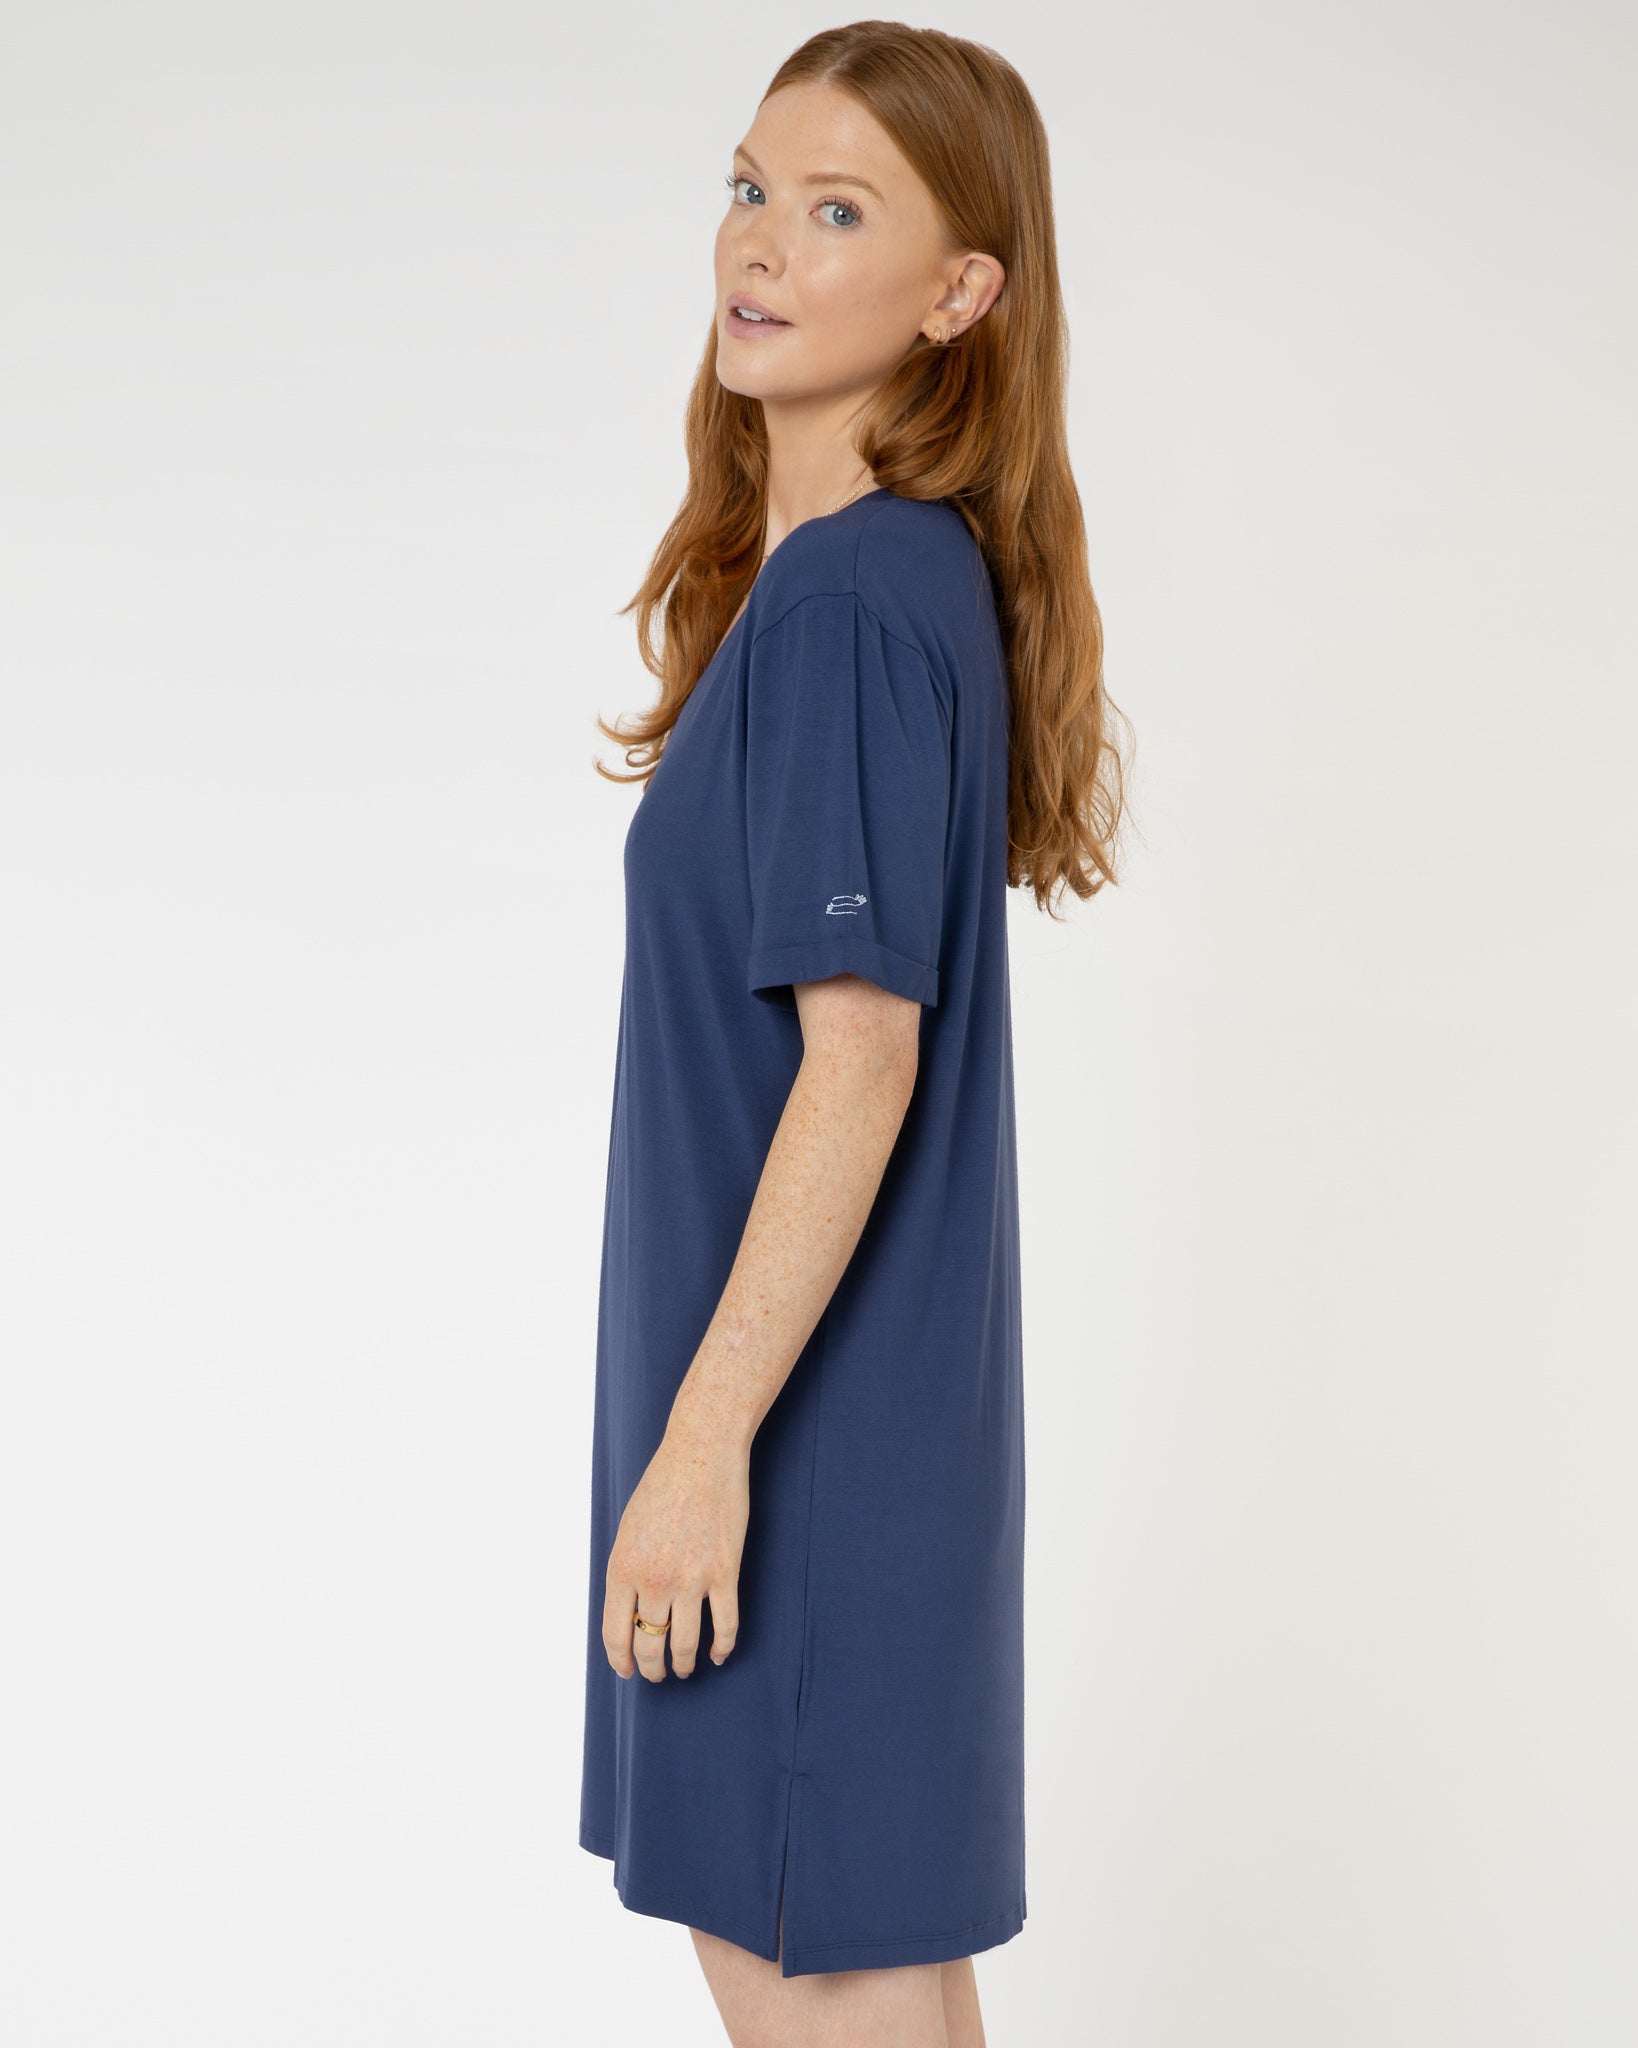 Woman wearing navy blue V-neck jersey nightdress made of micromodal fabric from Yawn.